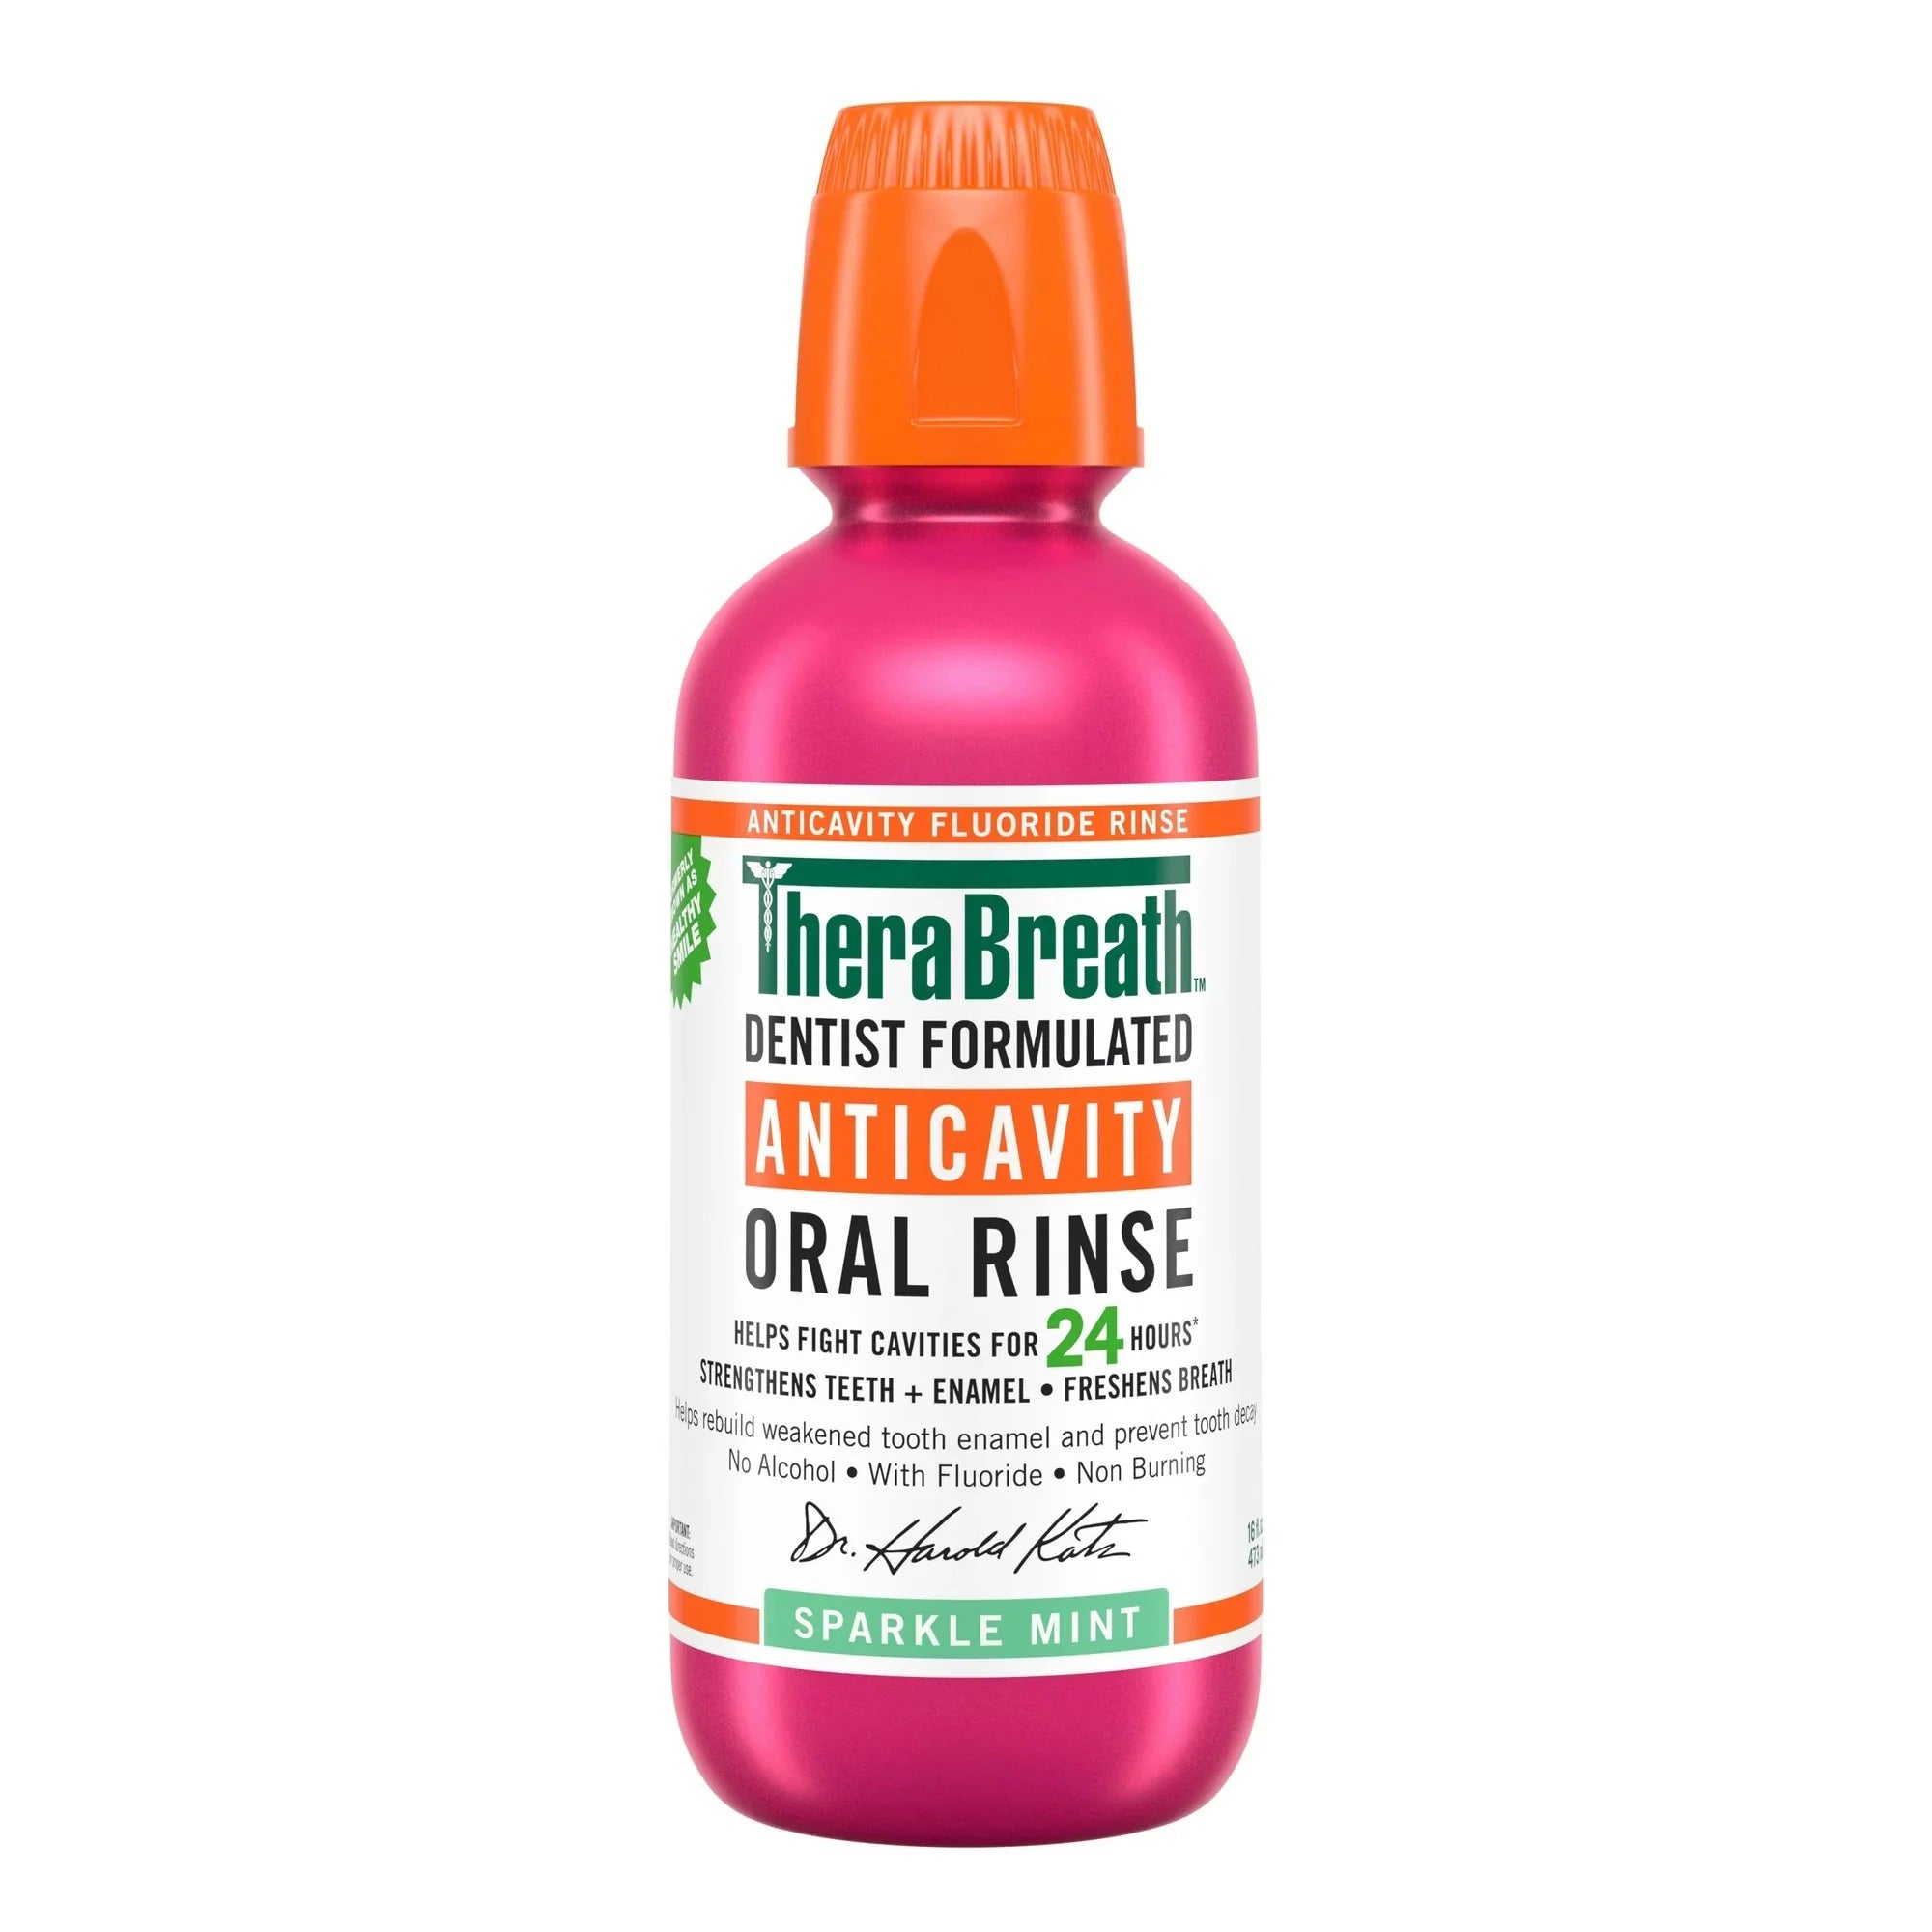 Wholesale prices with free shipping all over United States TheraBreath Anticavity Fluoride Mouthwash, Sparkle Mint, Dentist Formulated, 16 fl oz - Steven Deals